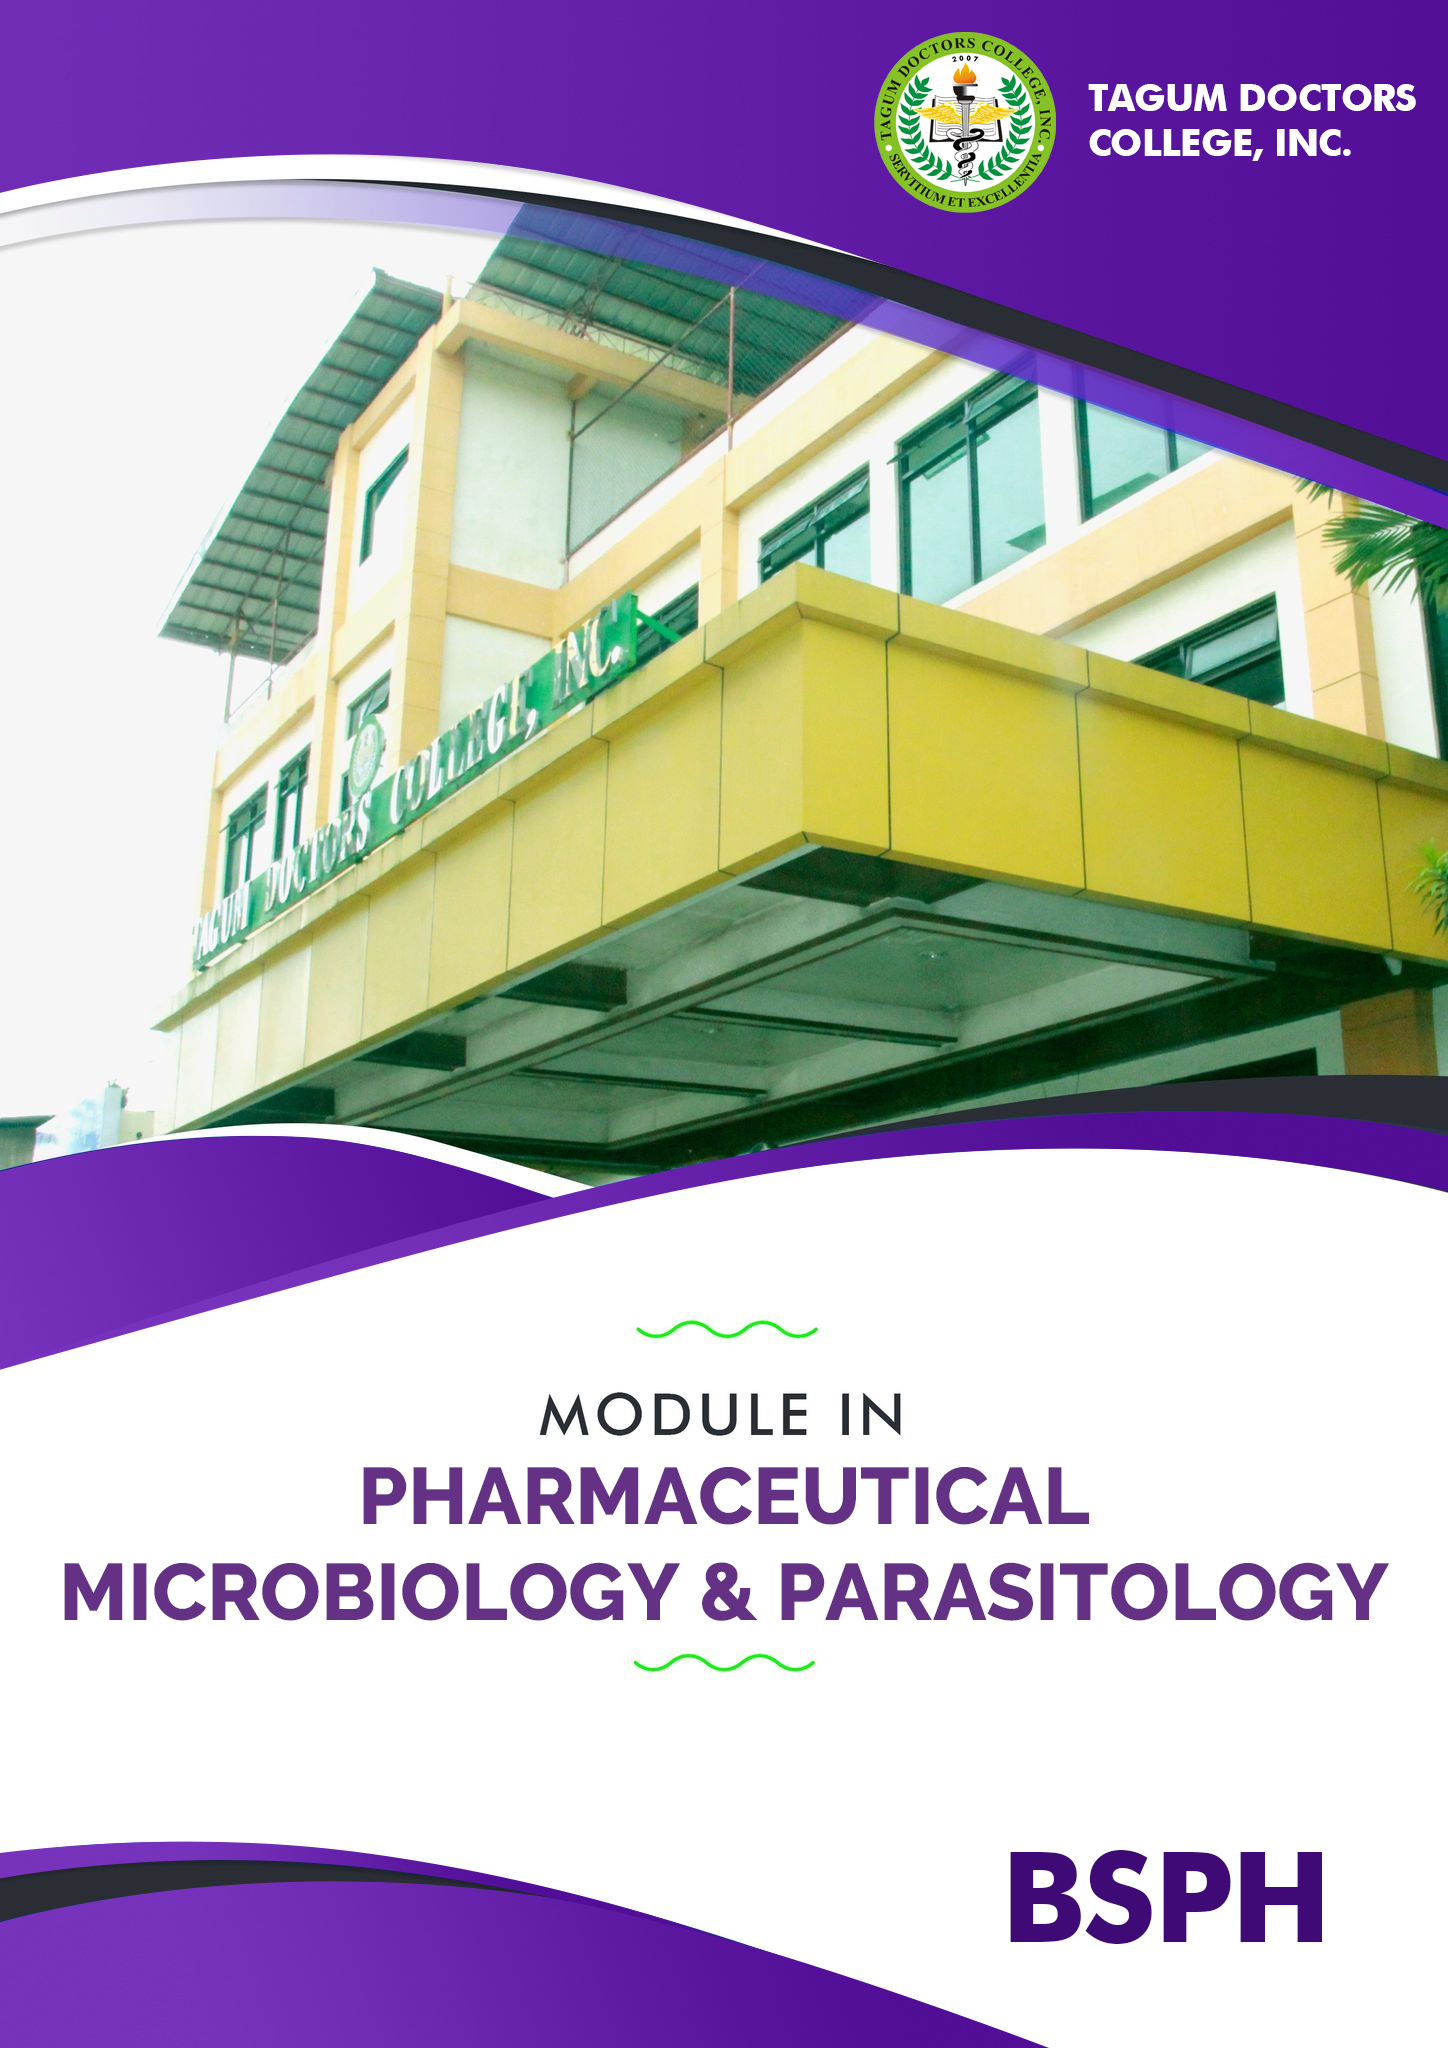 Pharmaceutical Microbiology and Parasitology  - BSPh 2B